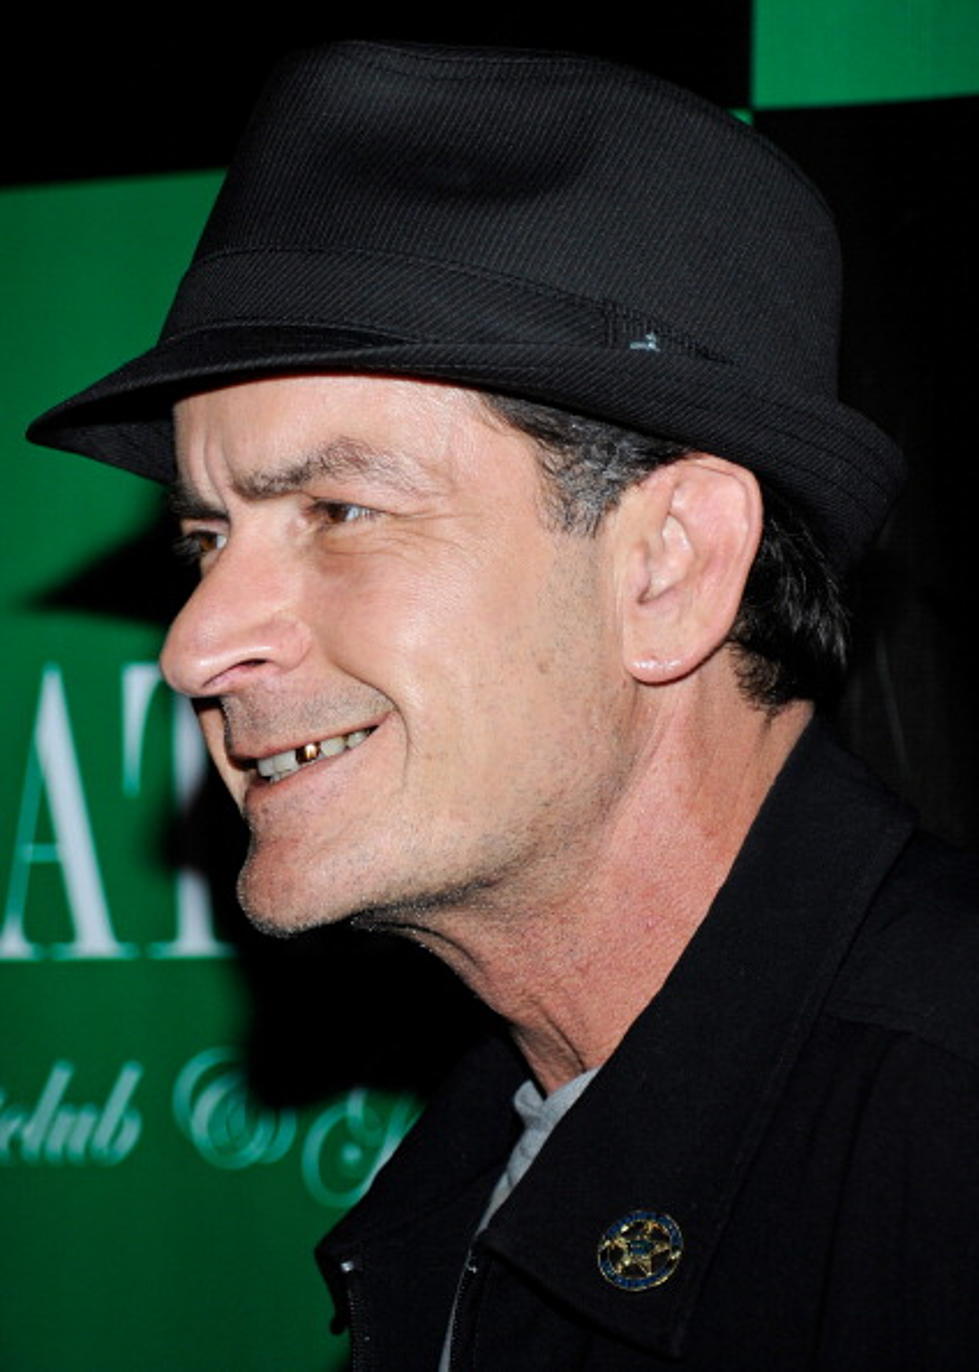 Charlie Sheen’s Character Reportedly Being Killed Off On ‘Men’